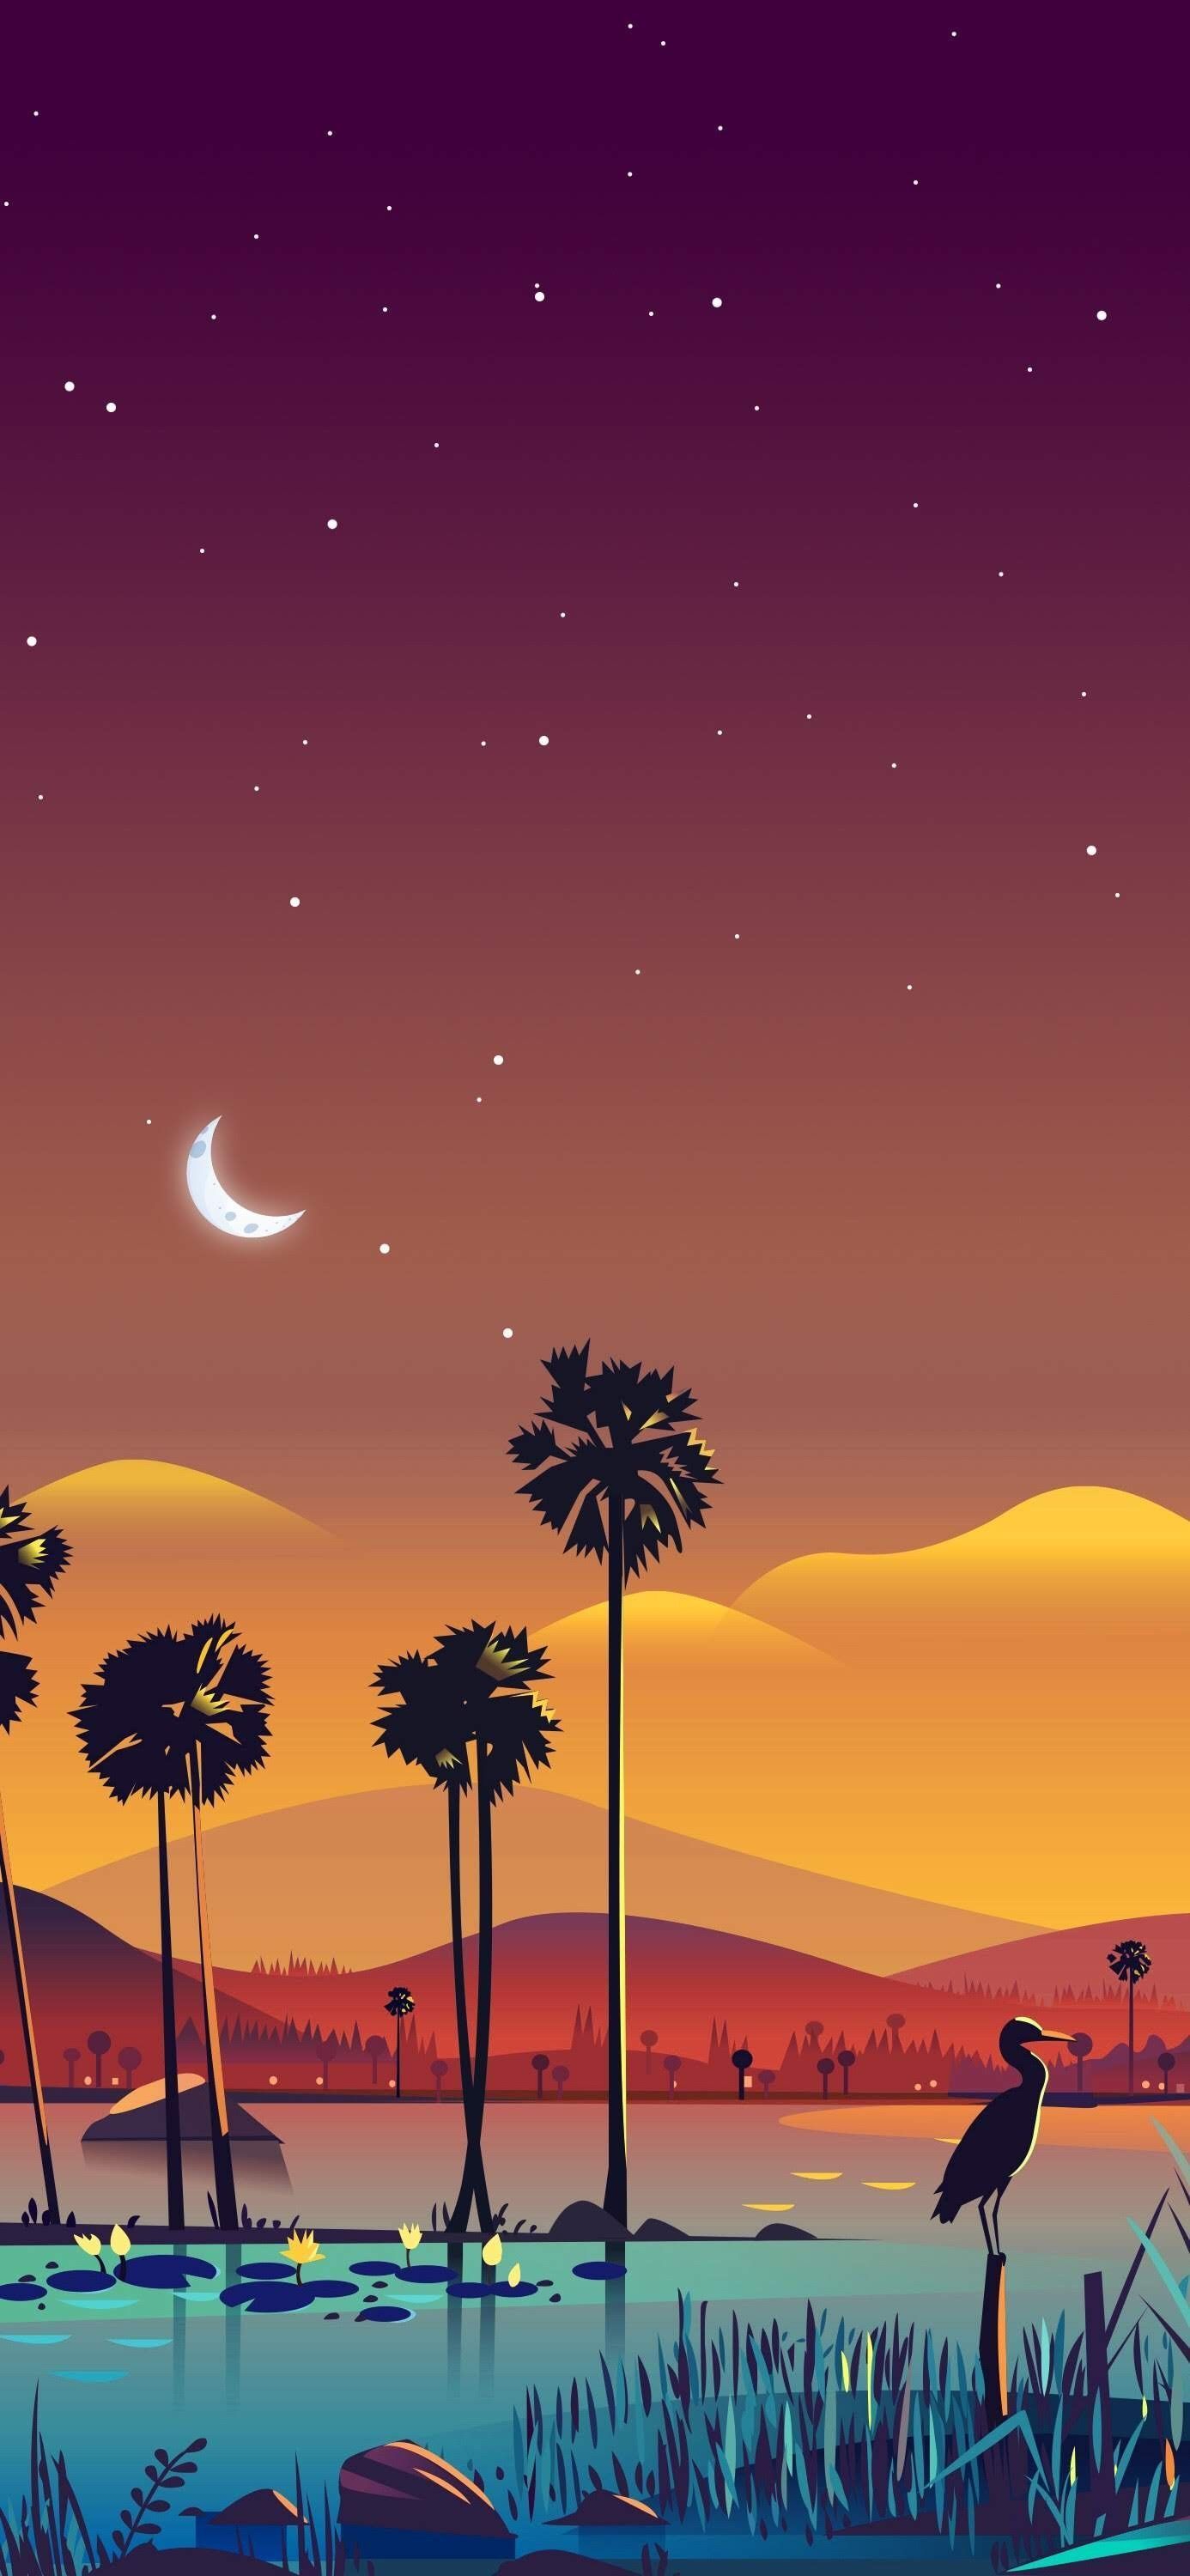 Desert Night Oasis with Palm Trees Art Wallpaper in 2020